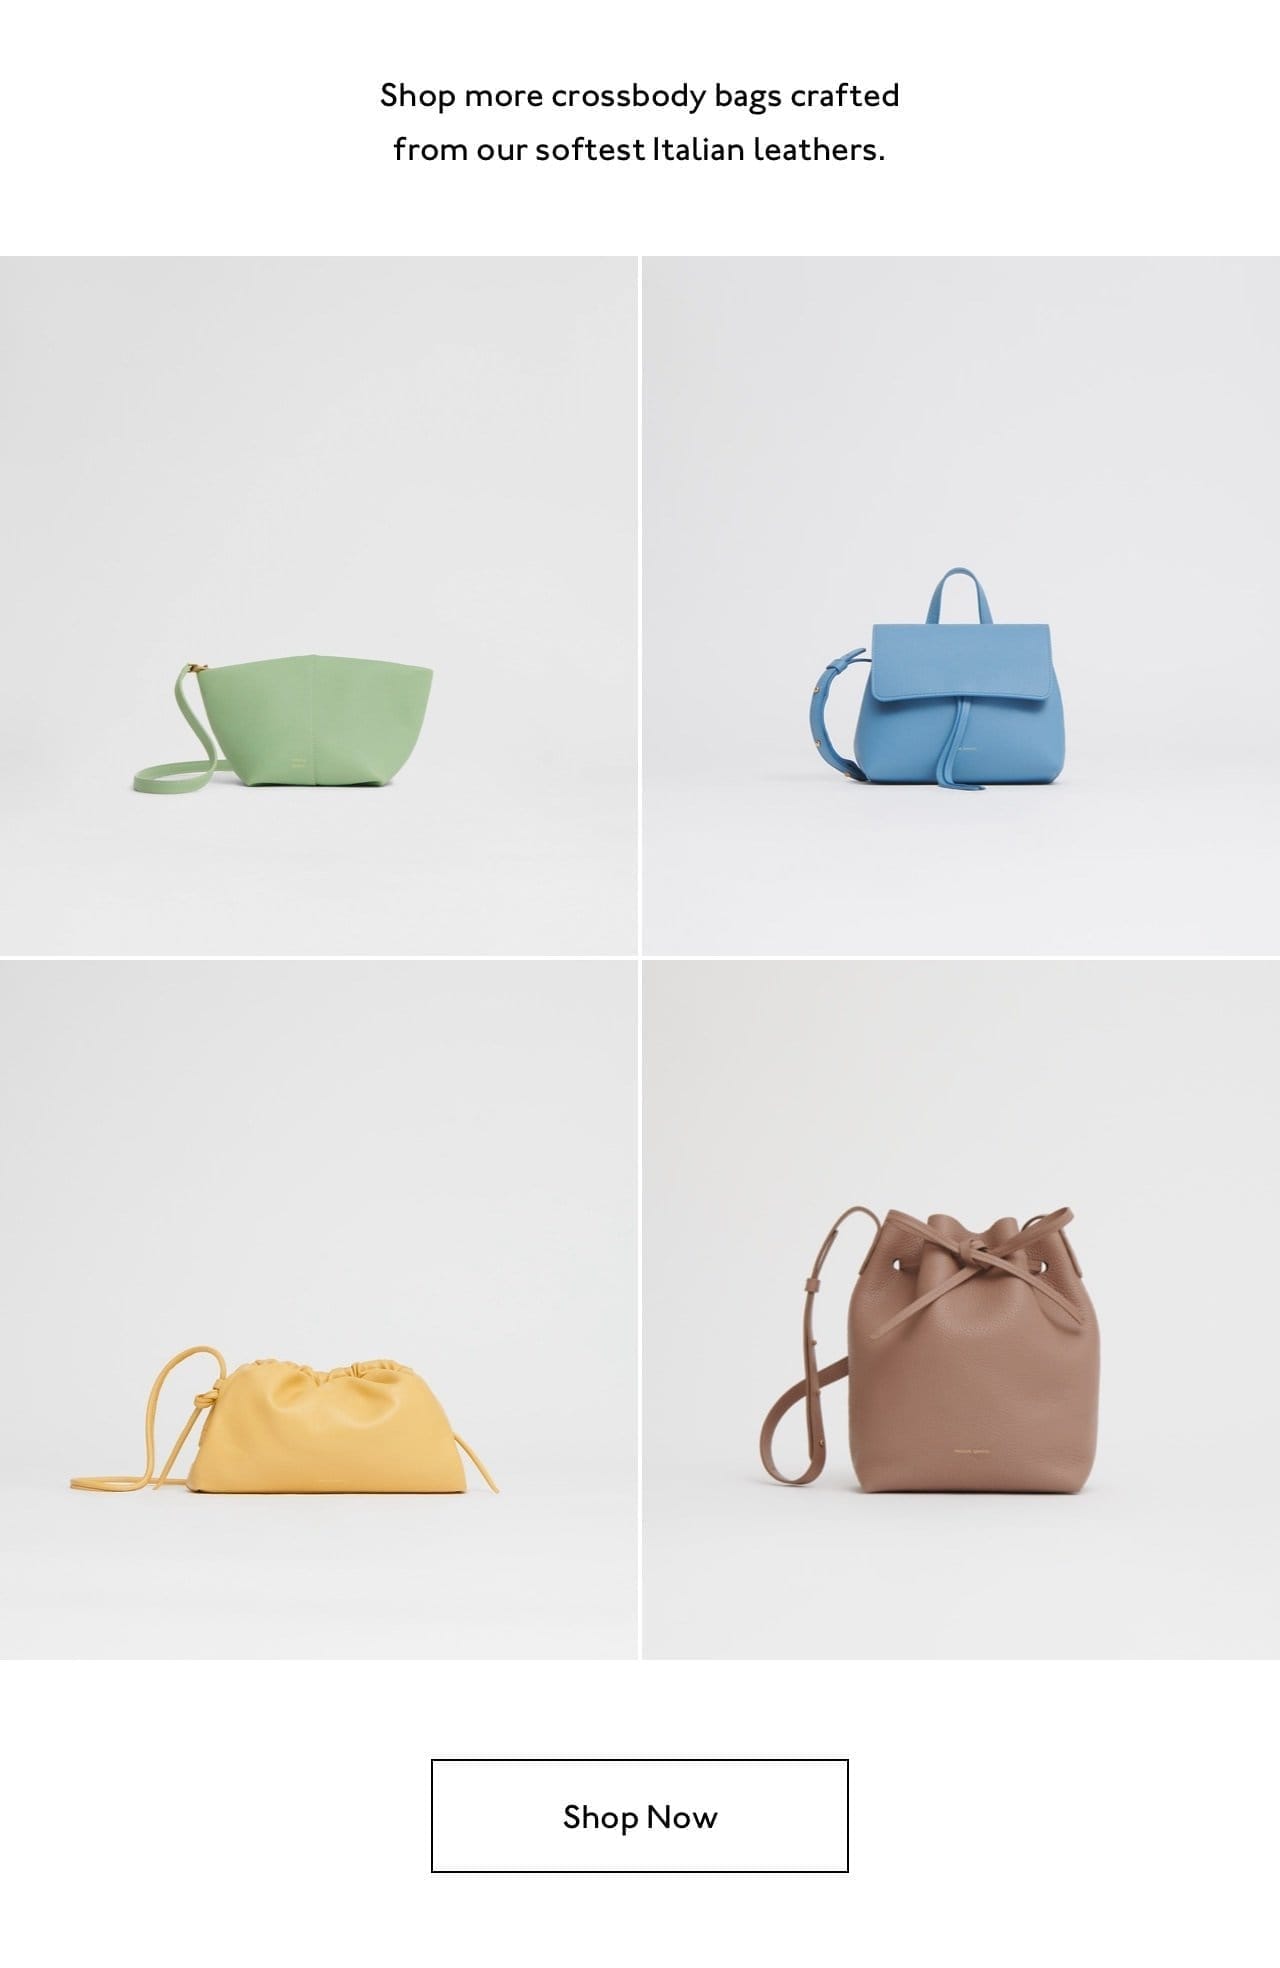 Shop more crossbody bags crafted from our softest Italian leathers.